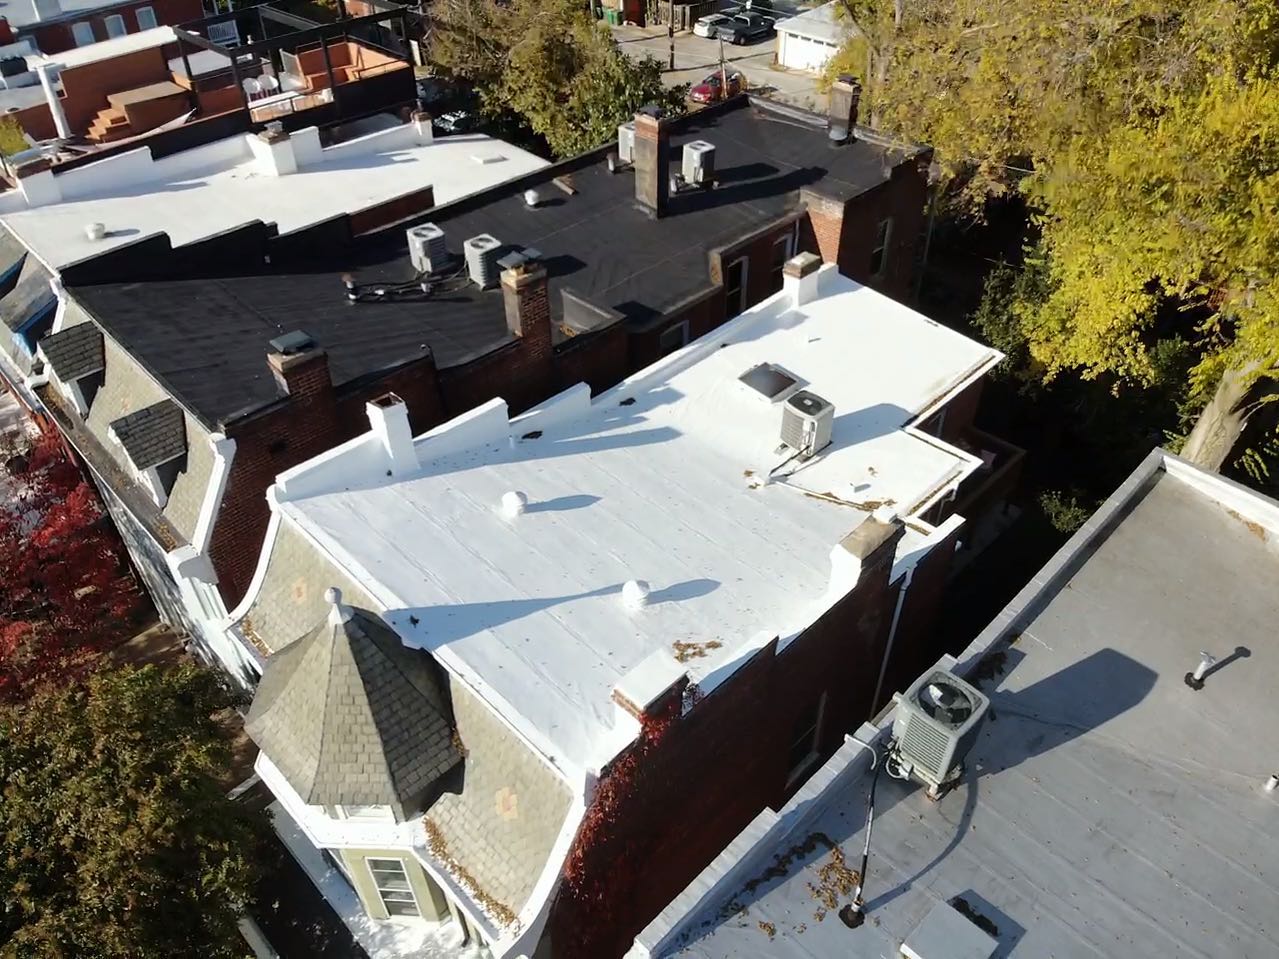 Historic Richmond, VA row homes with white and black flat roofs